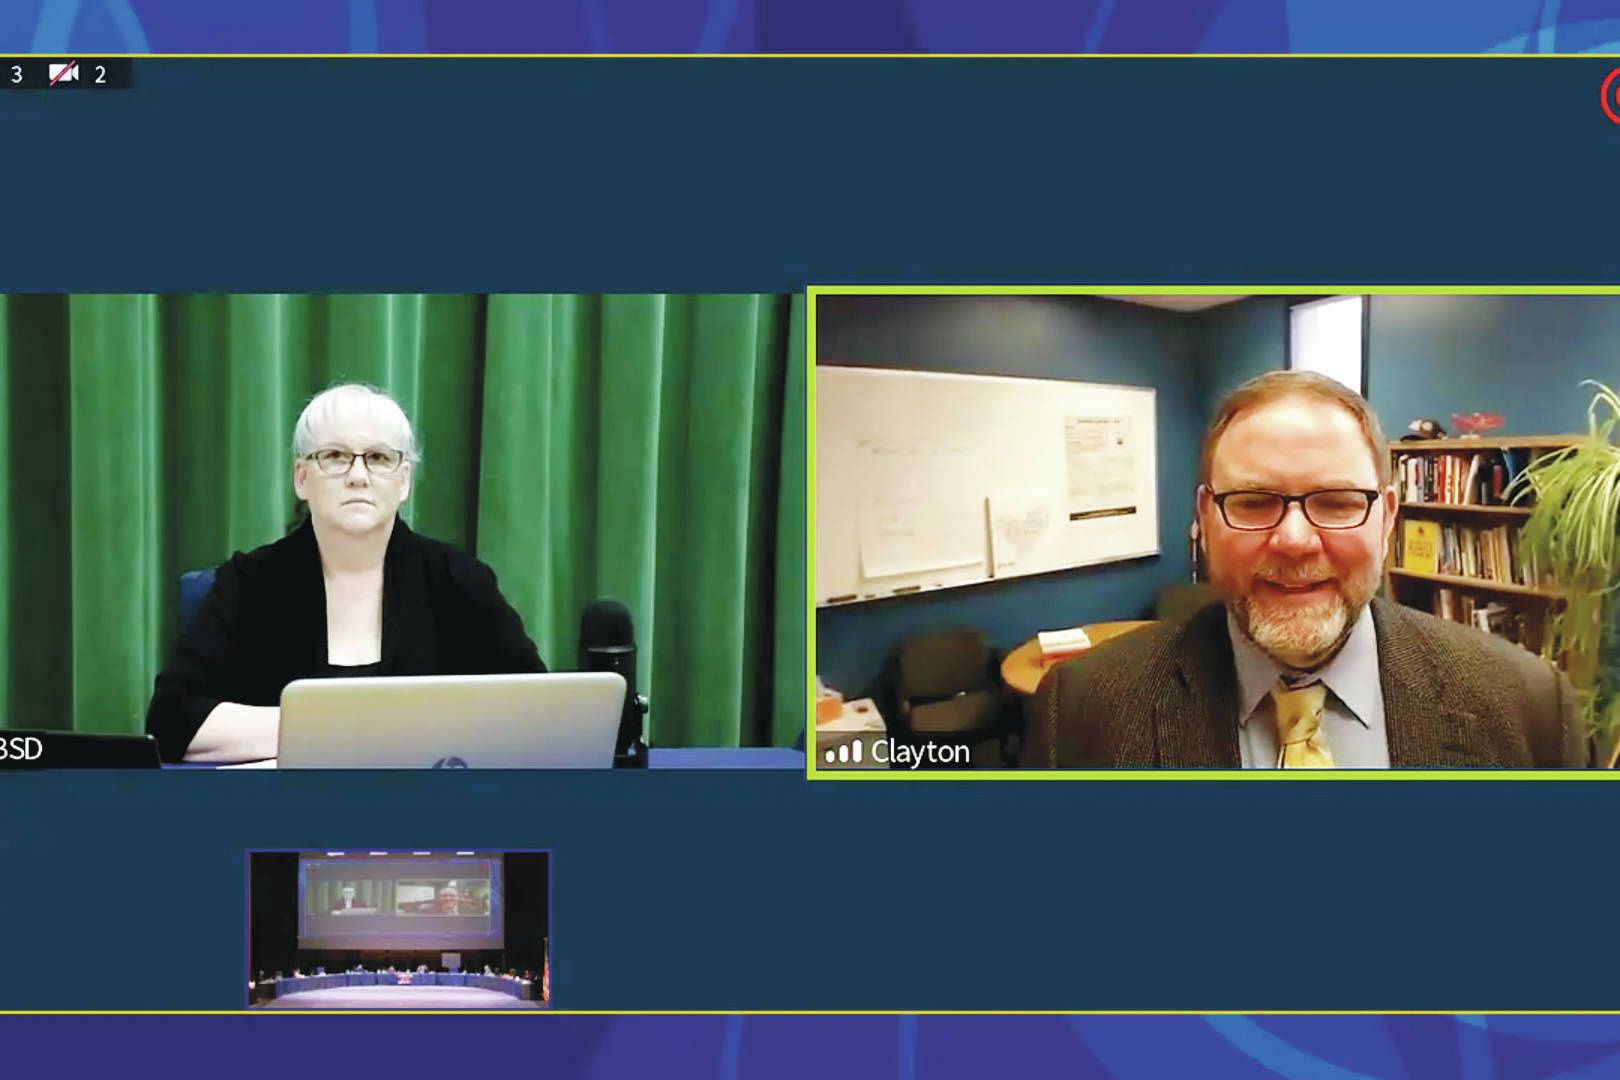 Debbie Cary (left) moderates a virtual interview with Clayton Holland on Tuesday, Jan. 26 in Kenai, Alaska. (Screenshot)